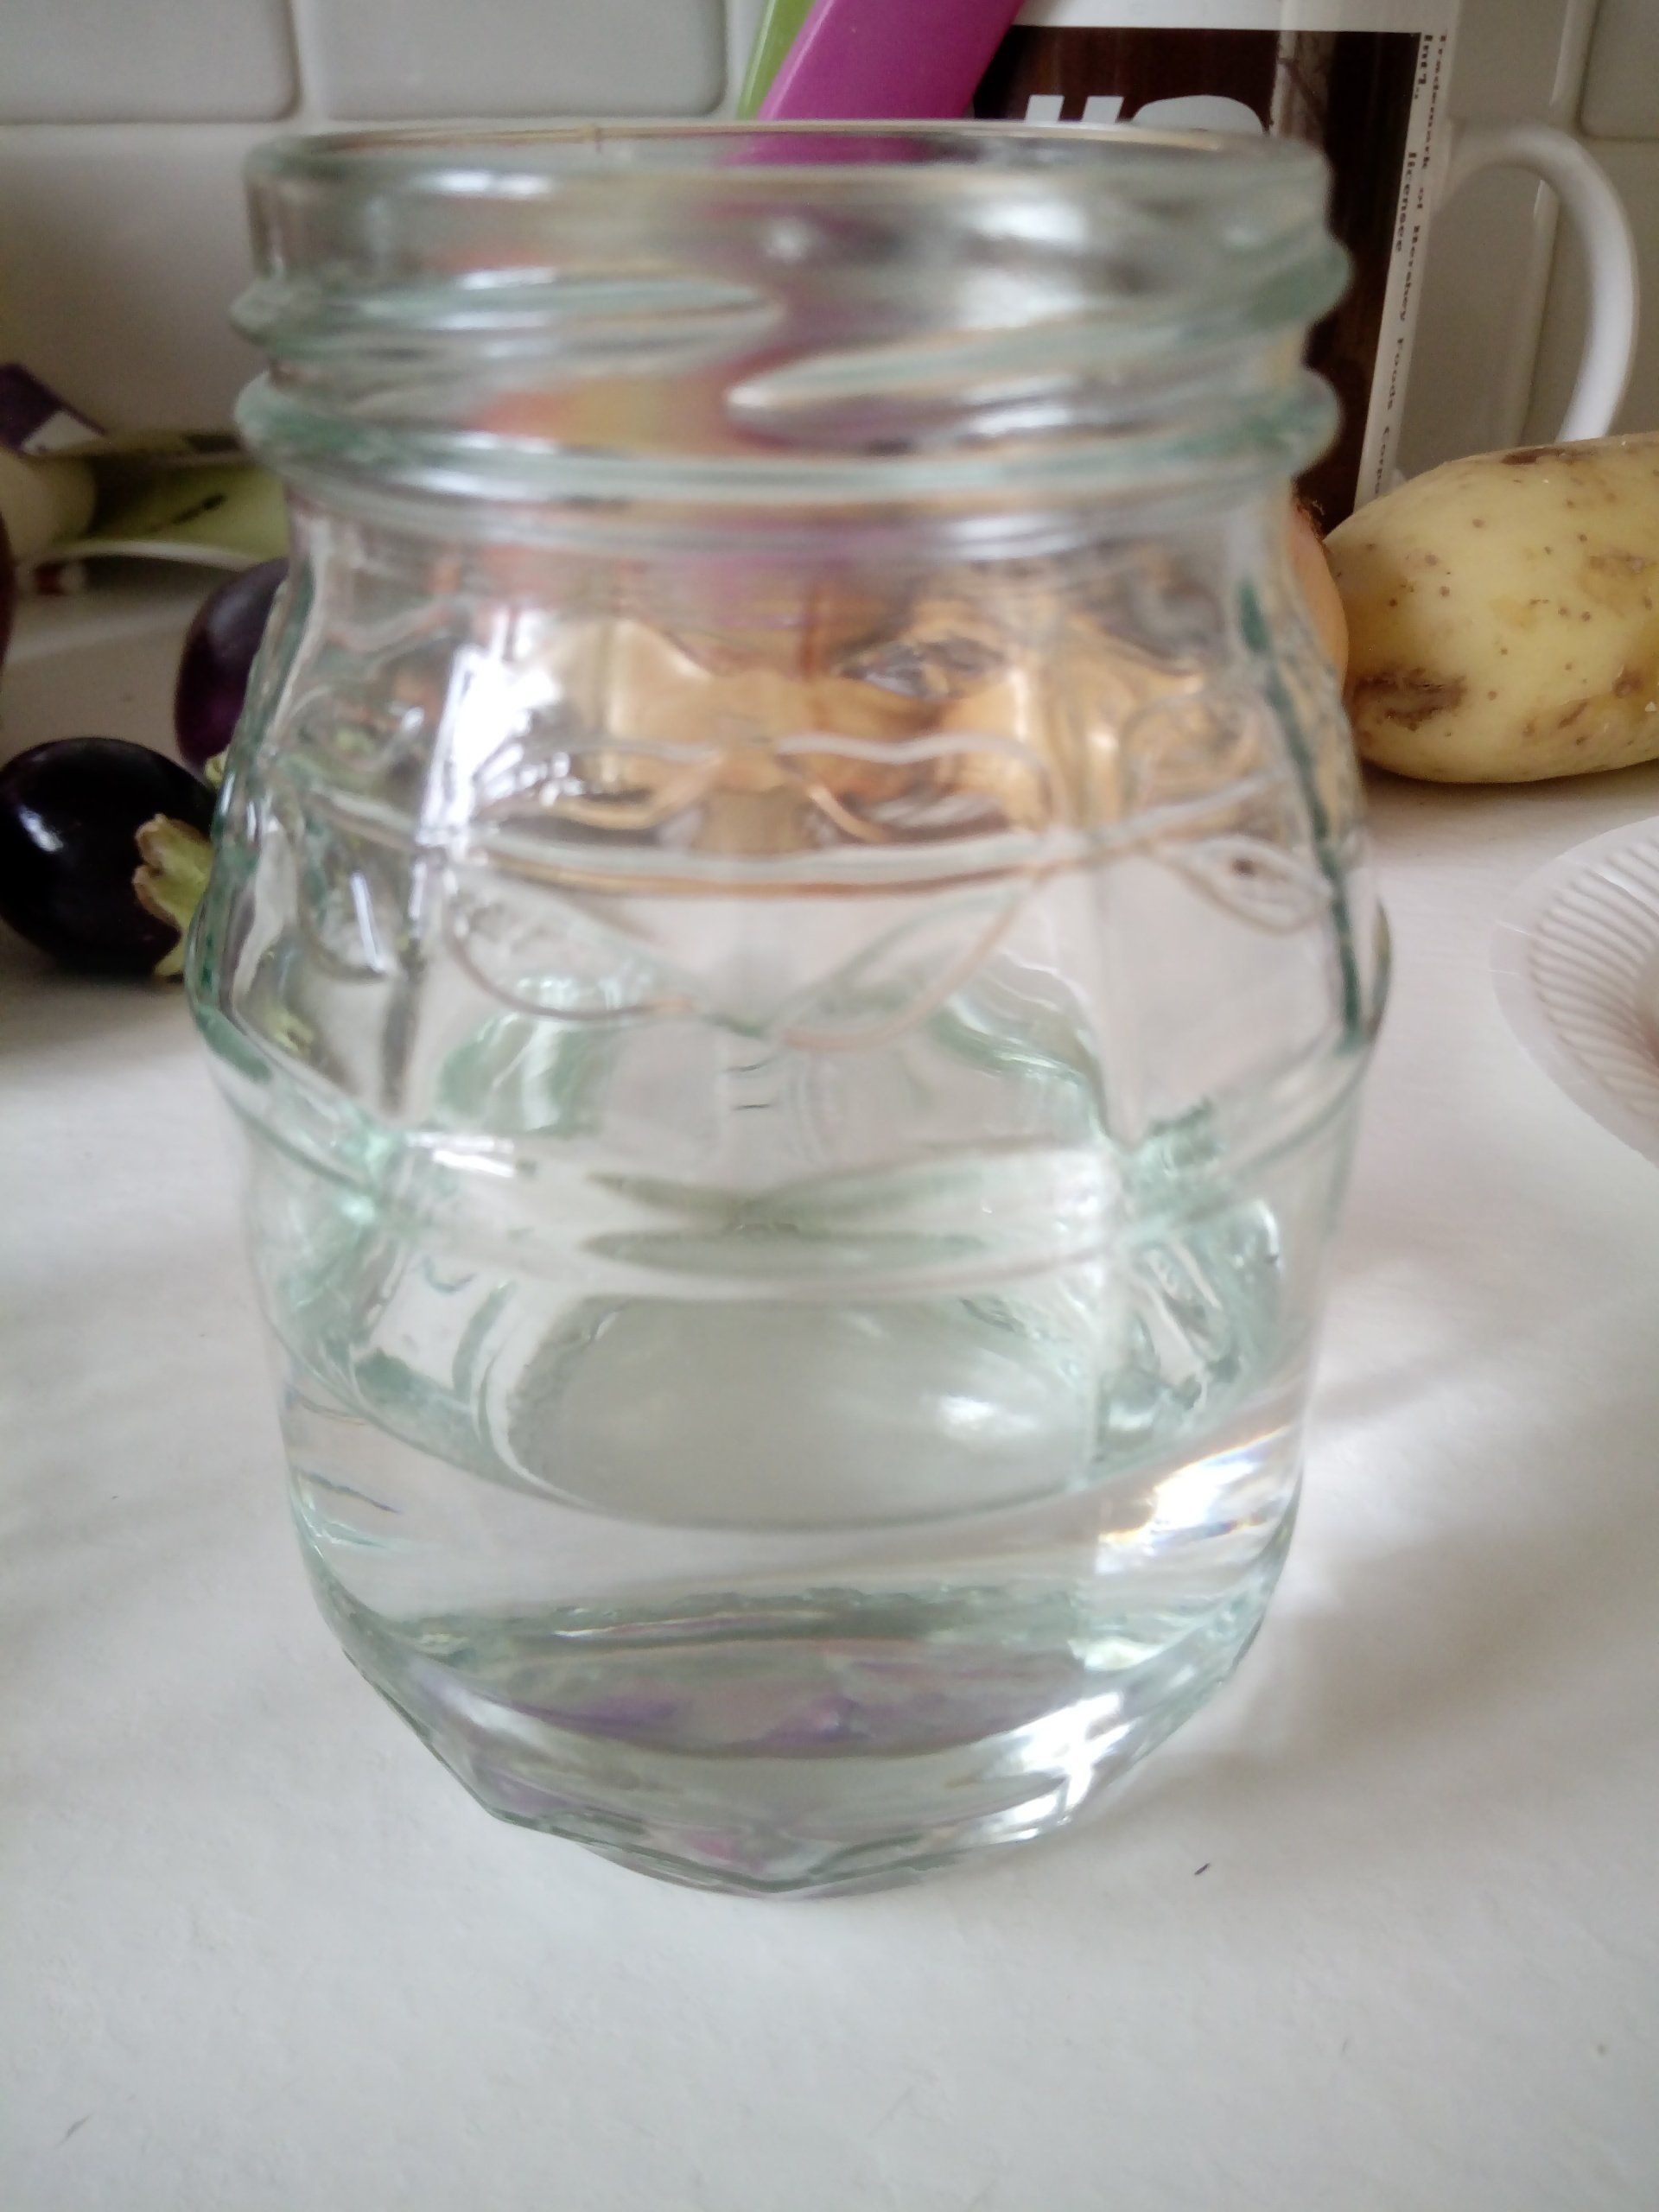 Water in the bottom of a jam jar